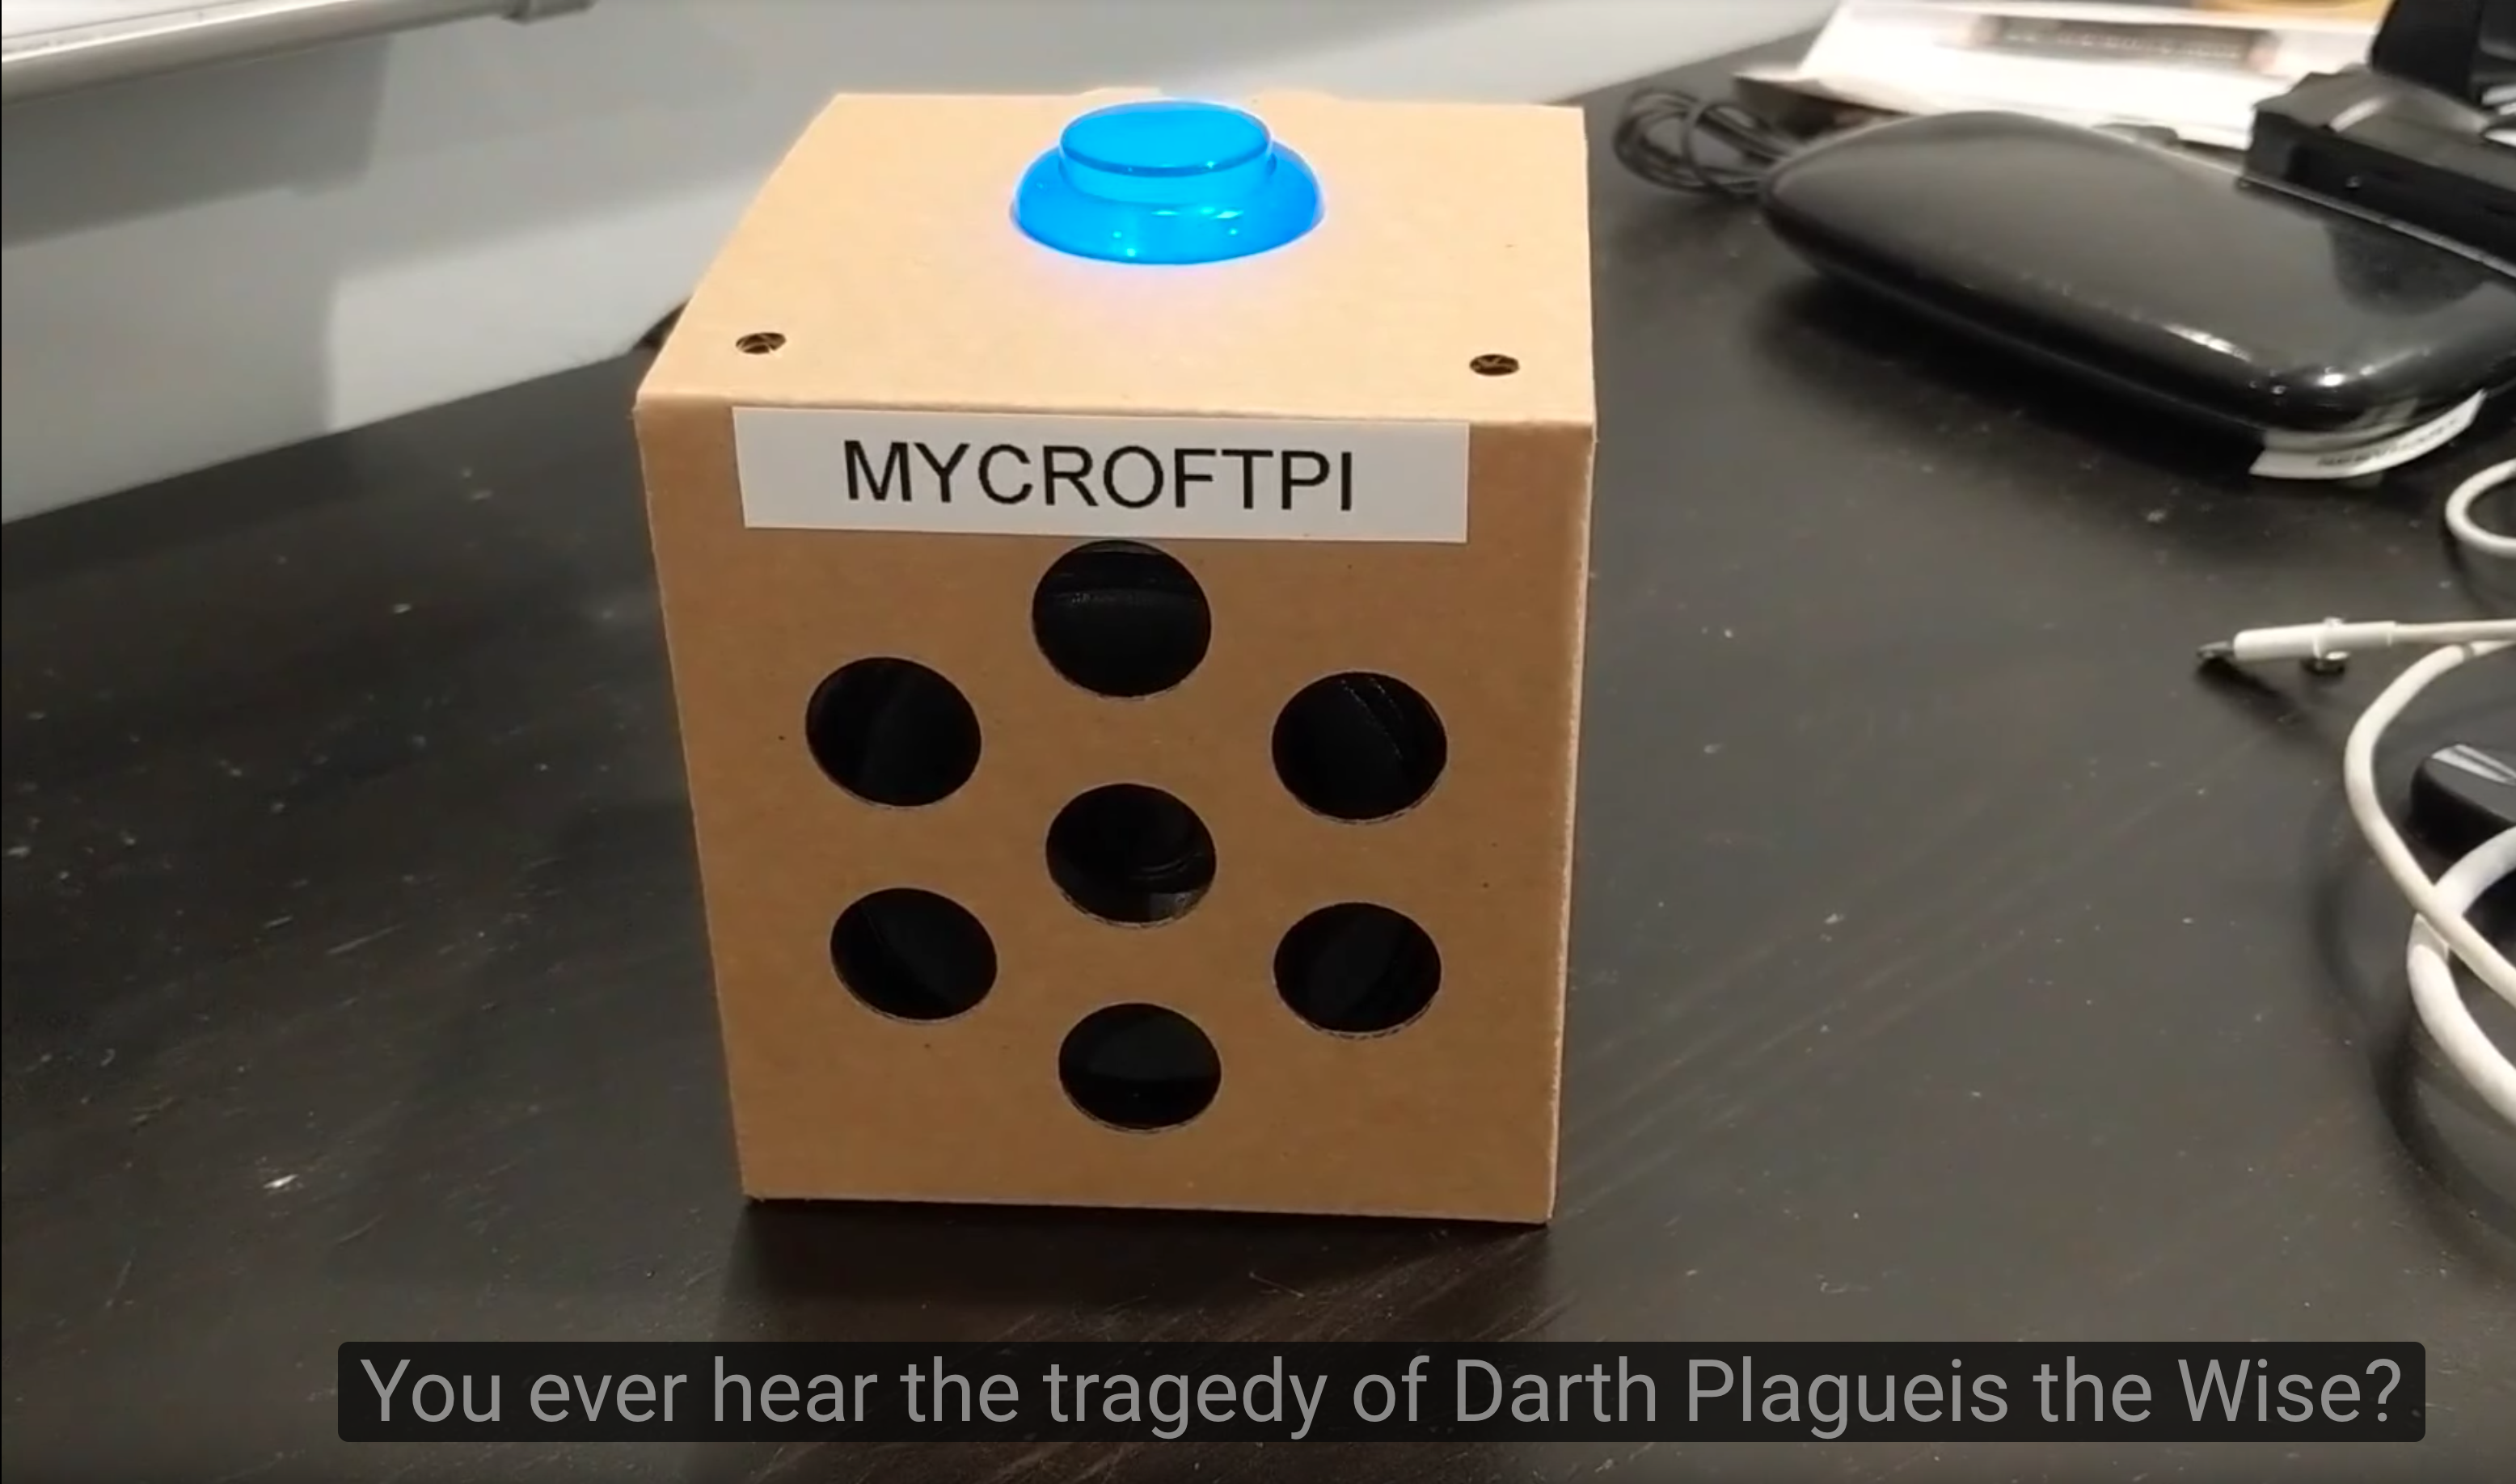 Making a Star Wars Day Skill for Mycroft - the open source voice assistant